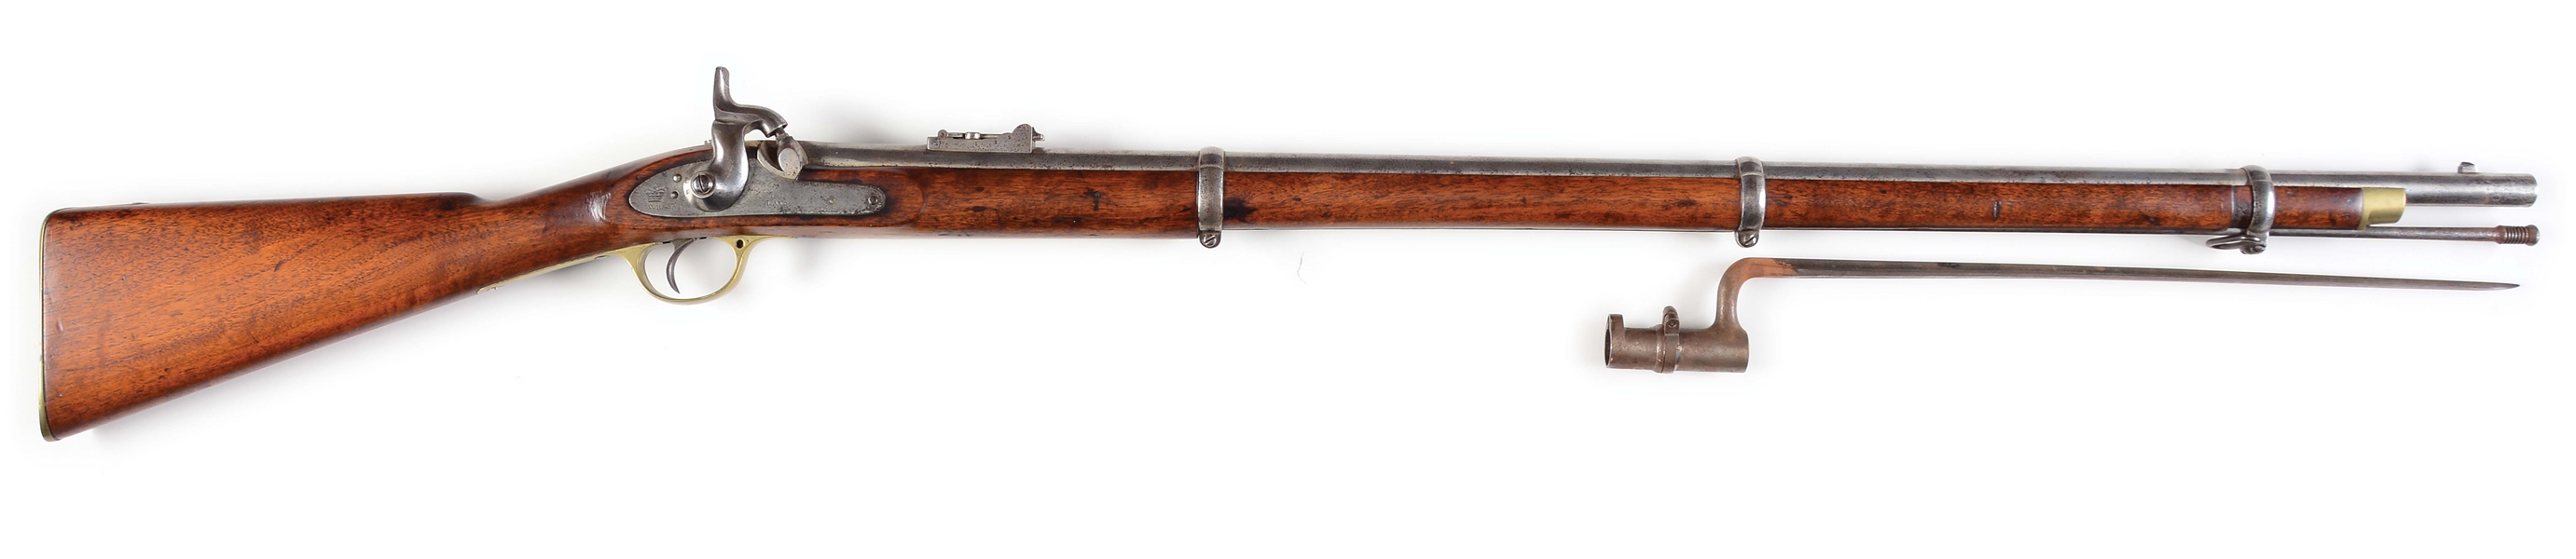 (A) CIVIL WAR LONDON ARMORY COMPANY .577 CALIBER PERCUSSION 1853 ENFIELD MUSKET, DATED 1862.